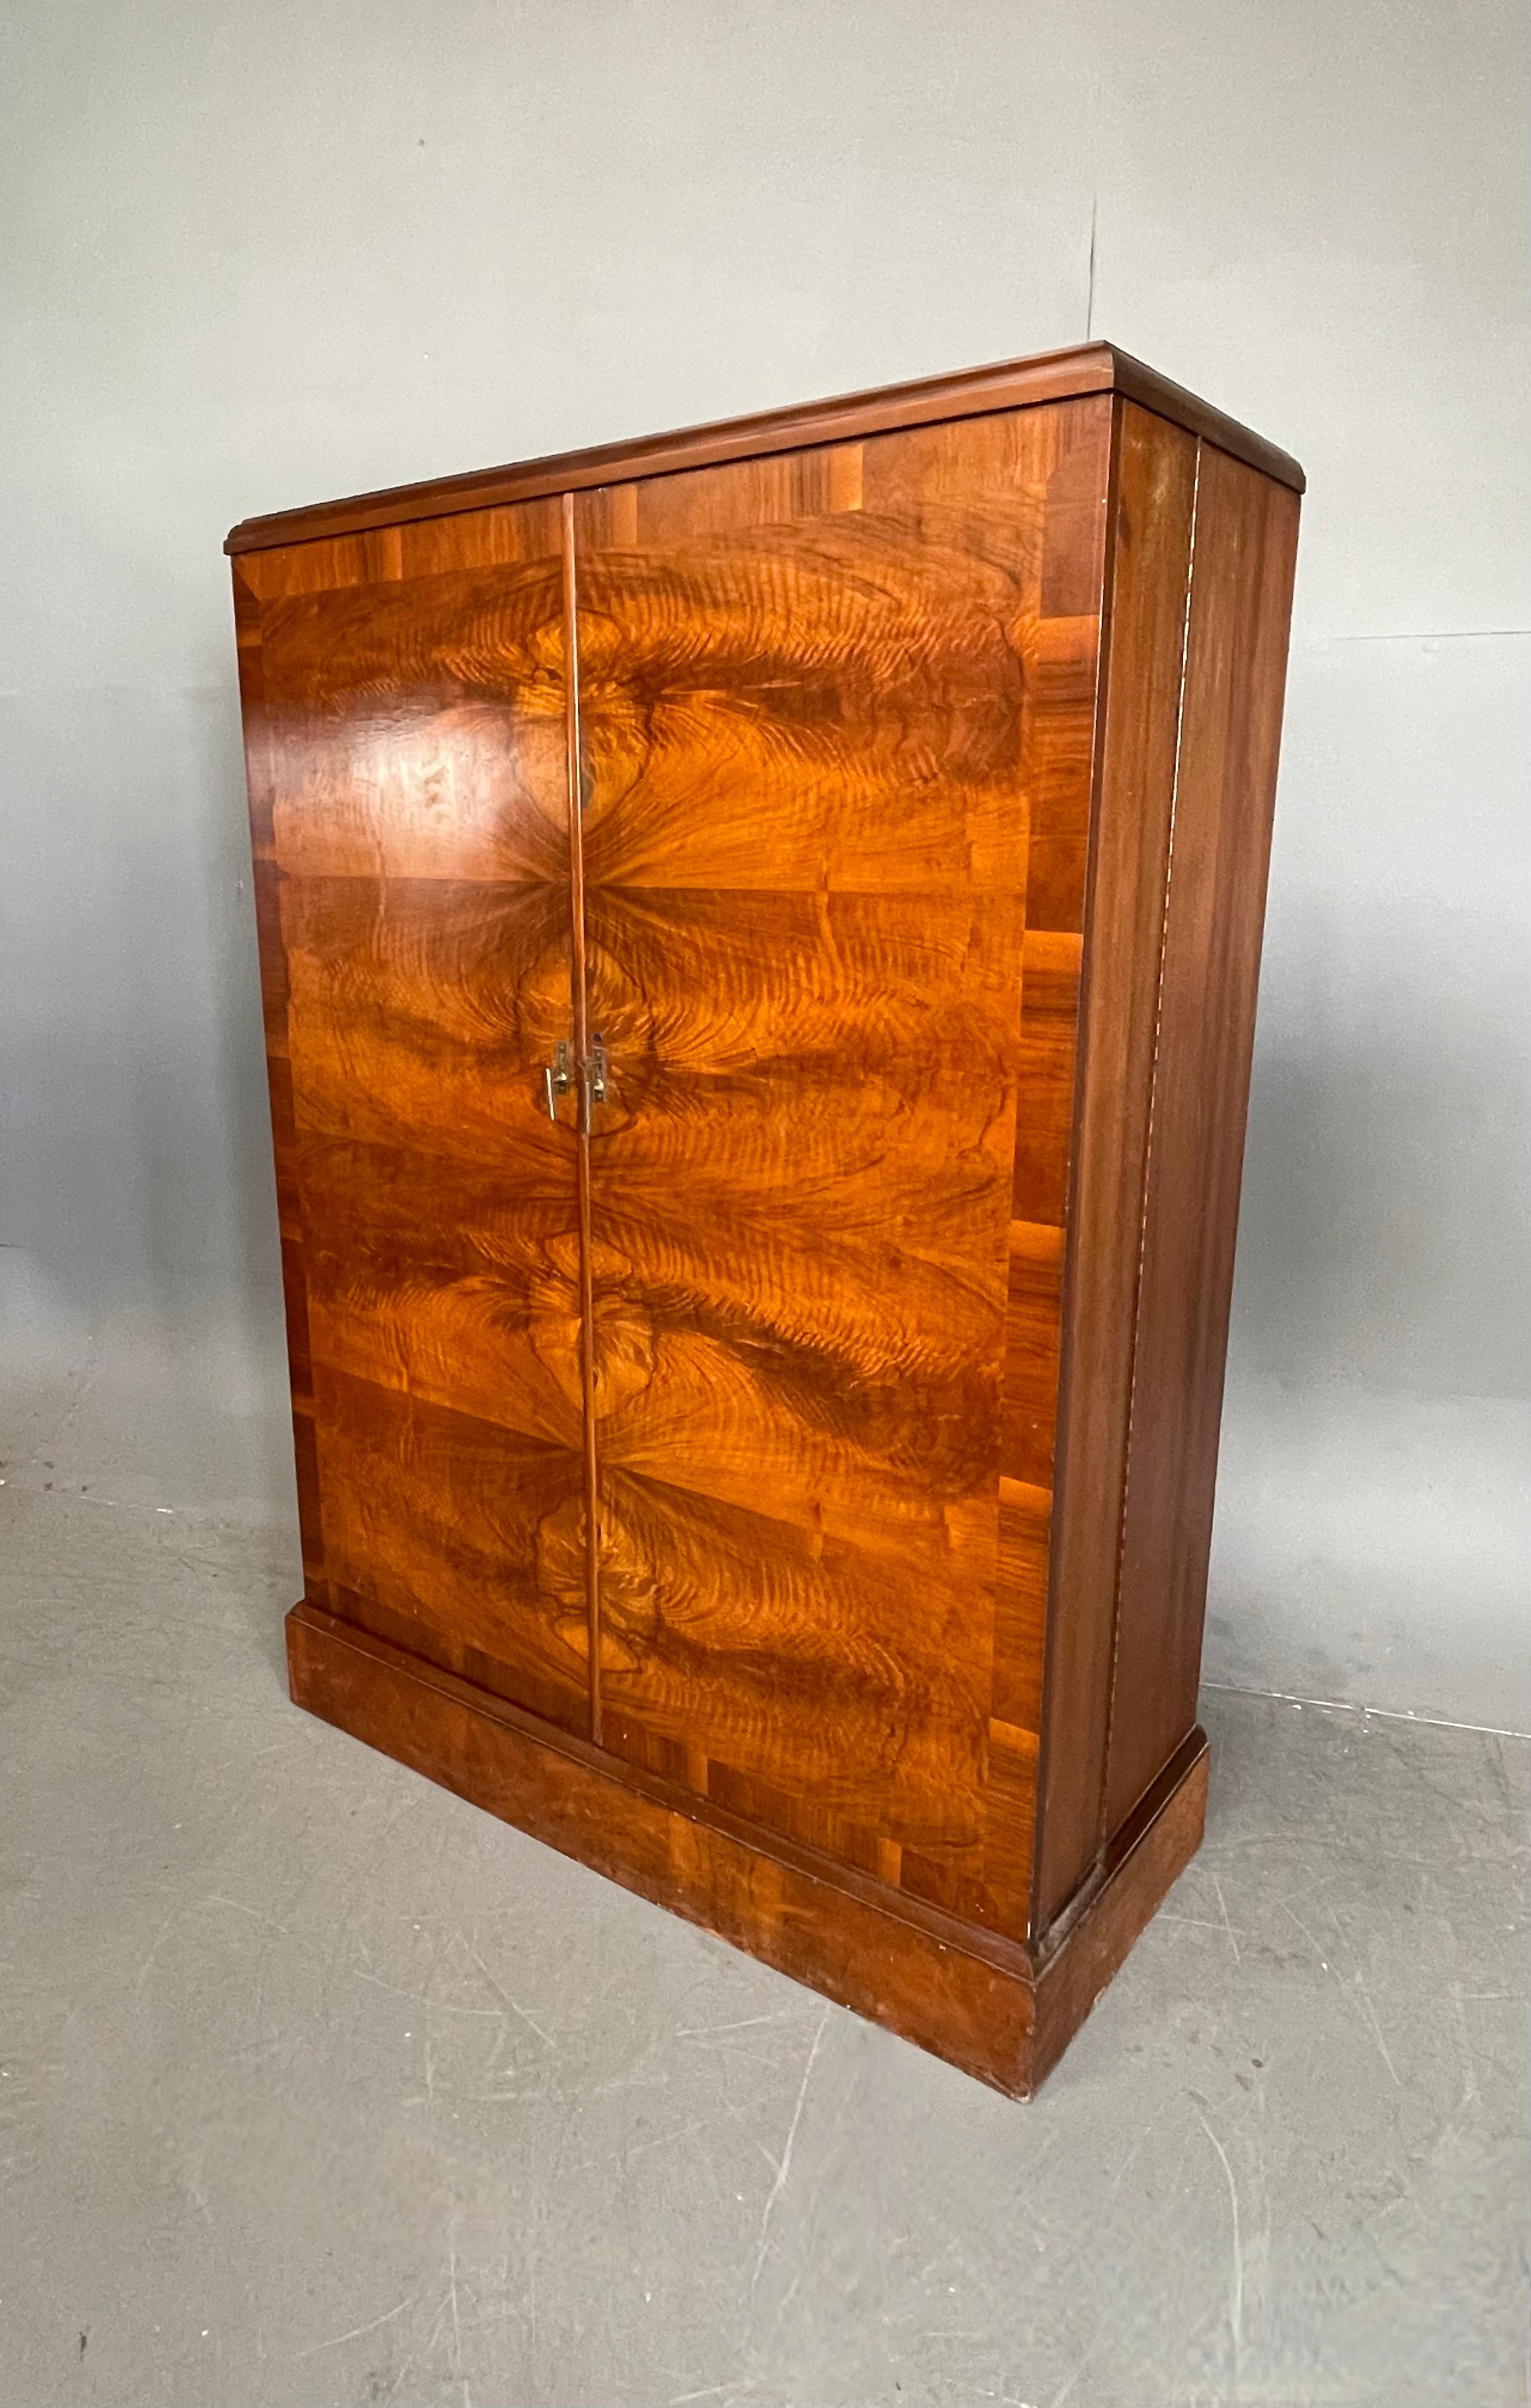 Original walnut compactom deep door gentleman’s fitted wardrobe model Y 
This iconic British made and designed wardrobe is in fantastic original condition 
The interior is fully fitted and retains all original labels and fittings 
The right hand